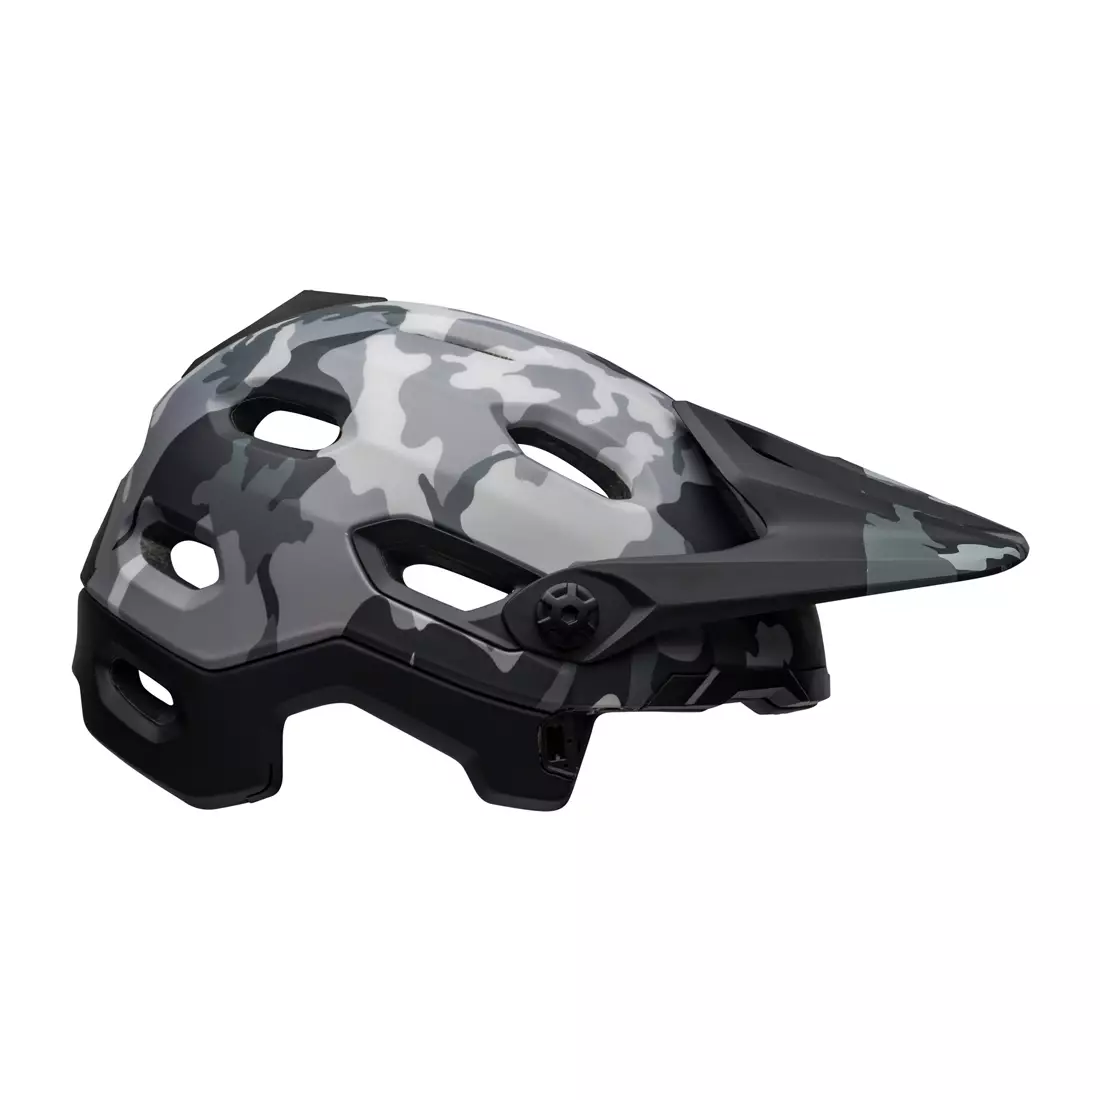 BELL SUPER DH MIPS SPHERICAL kask rowerowy full face, matte gloss black camo